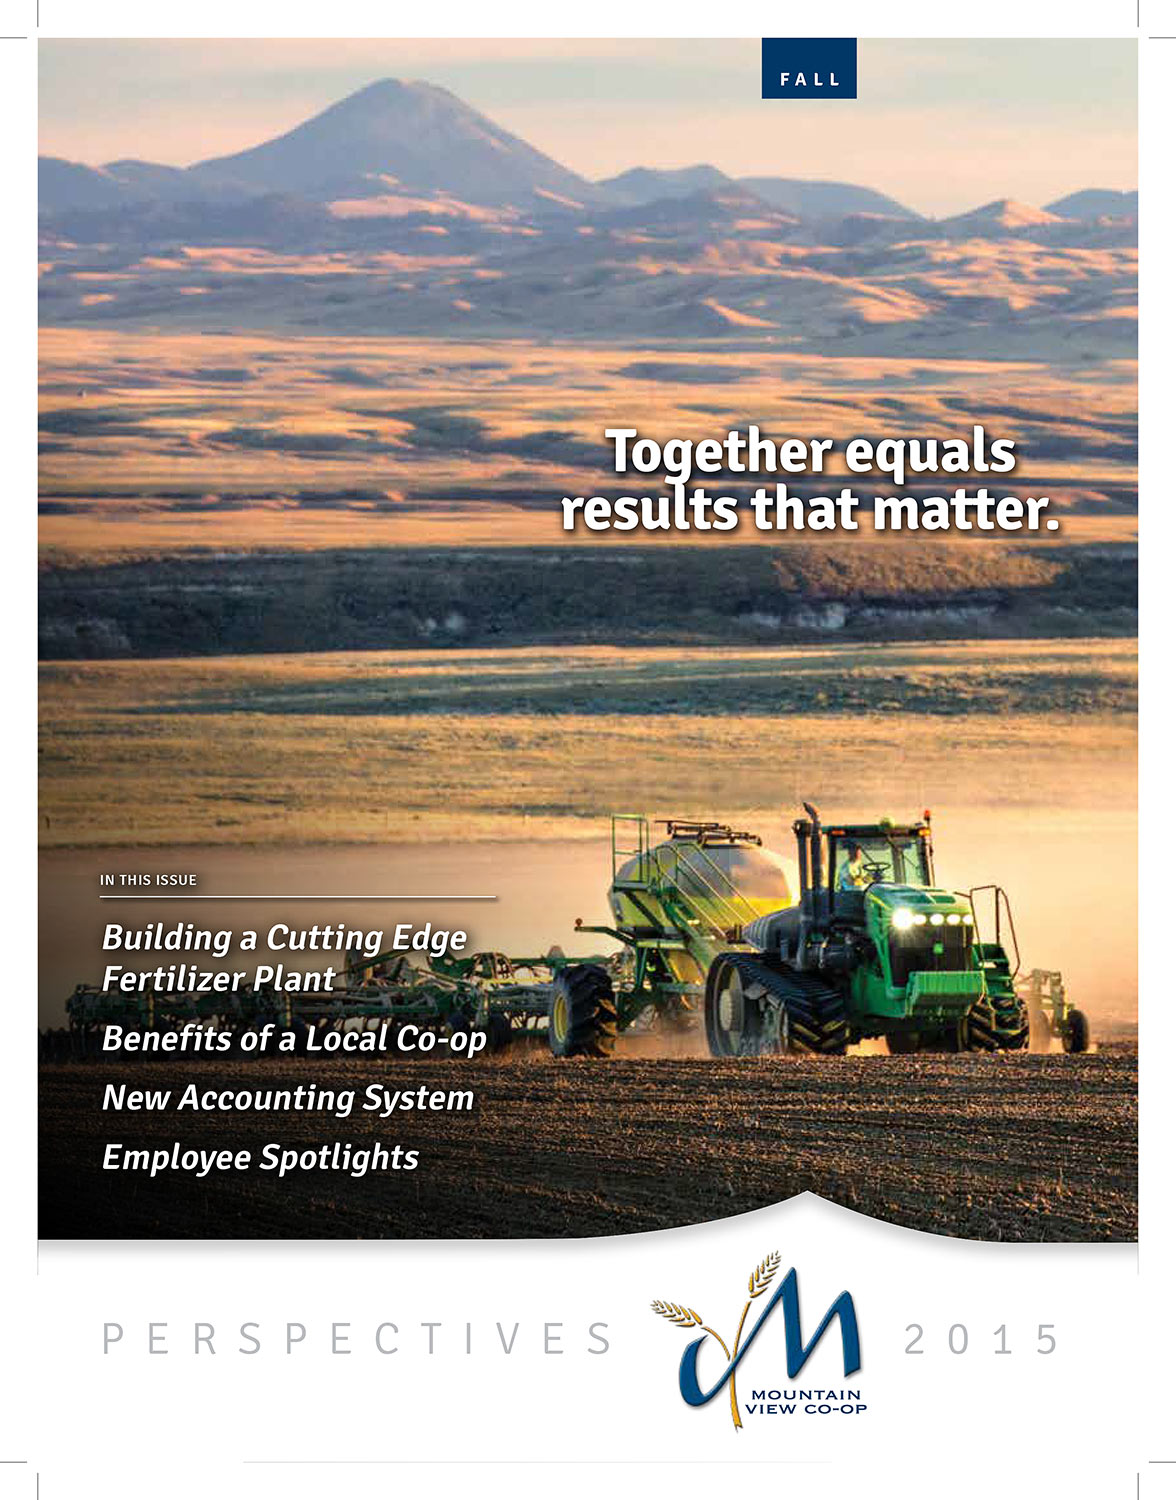 This is one of my agricultural photos published on the cover of the rural Mountain View Co-op autumn 2015 quarterly publication.